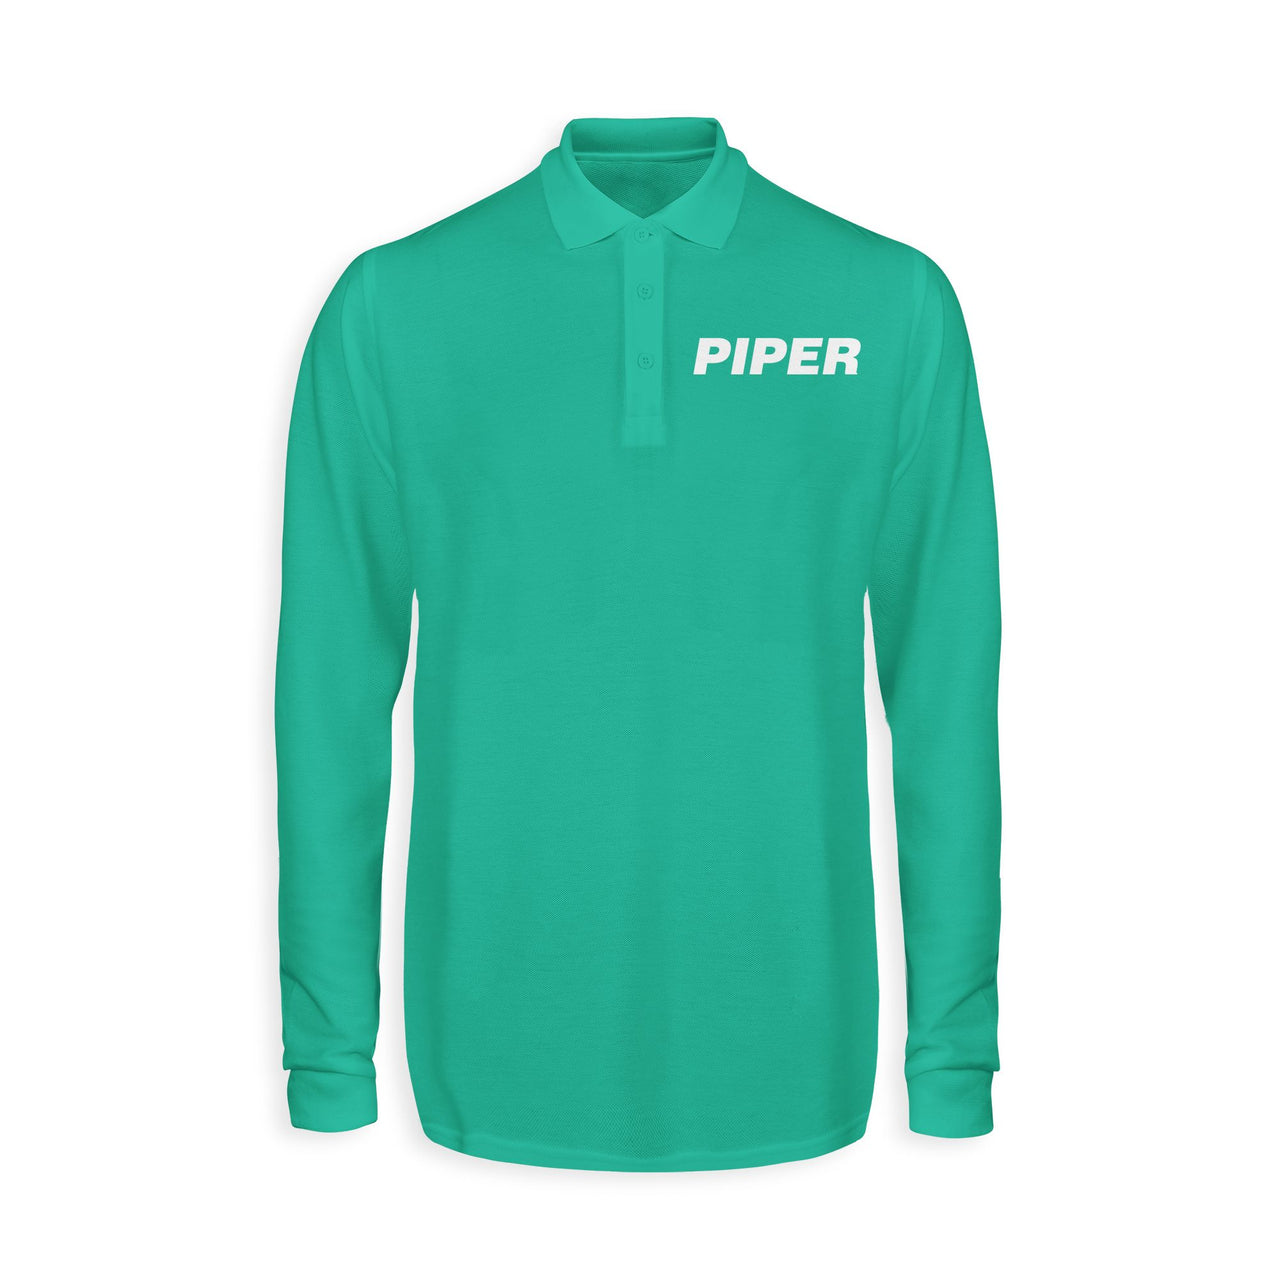 Piper & Text Designed Long Sleeve Polo T-Shirts